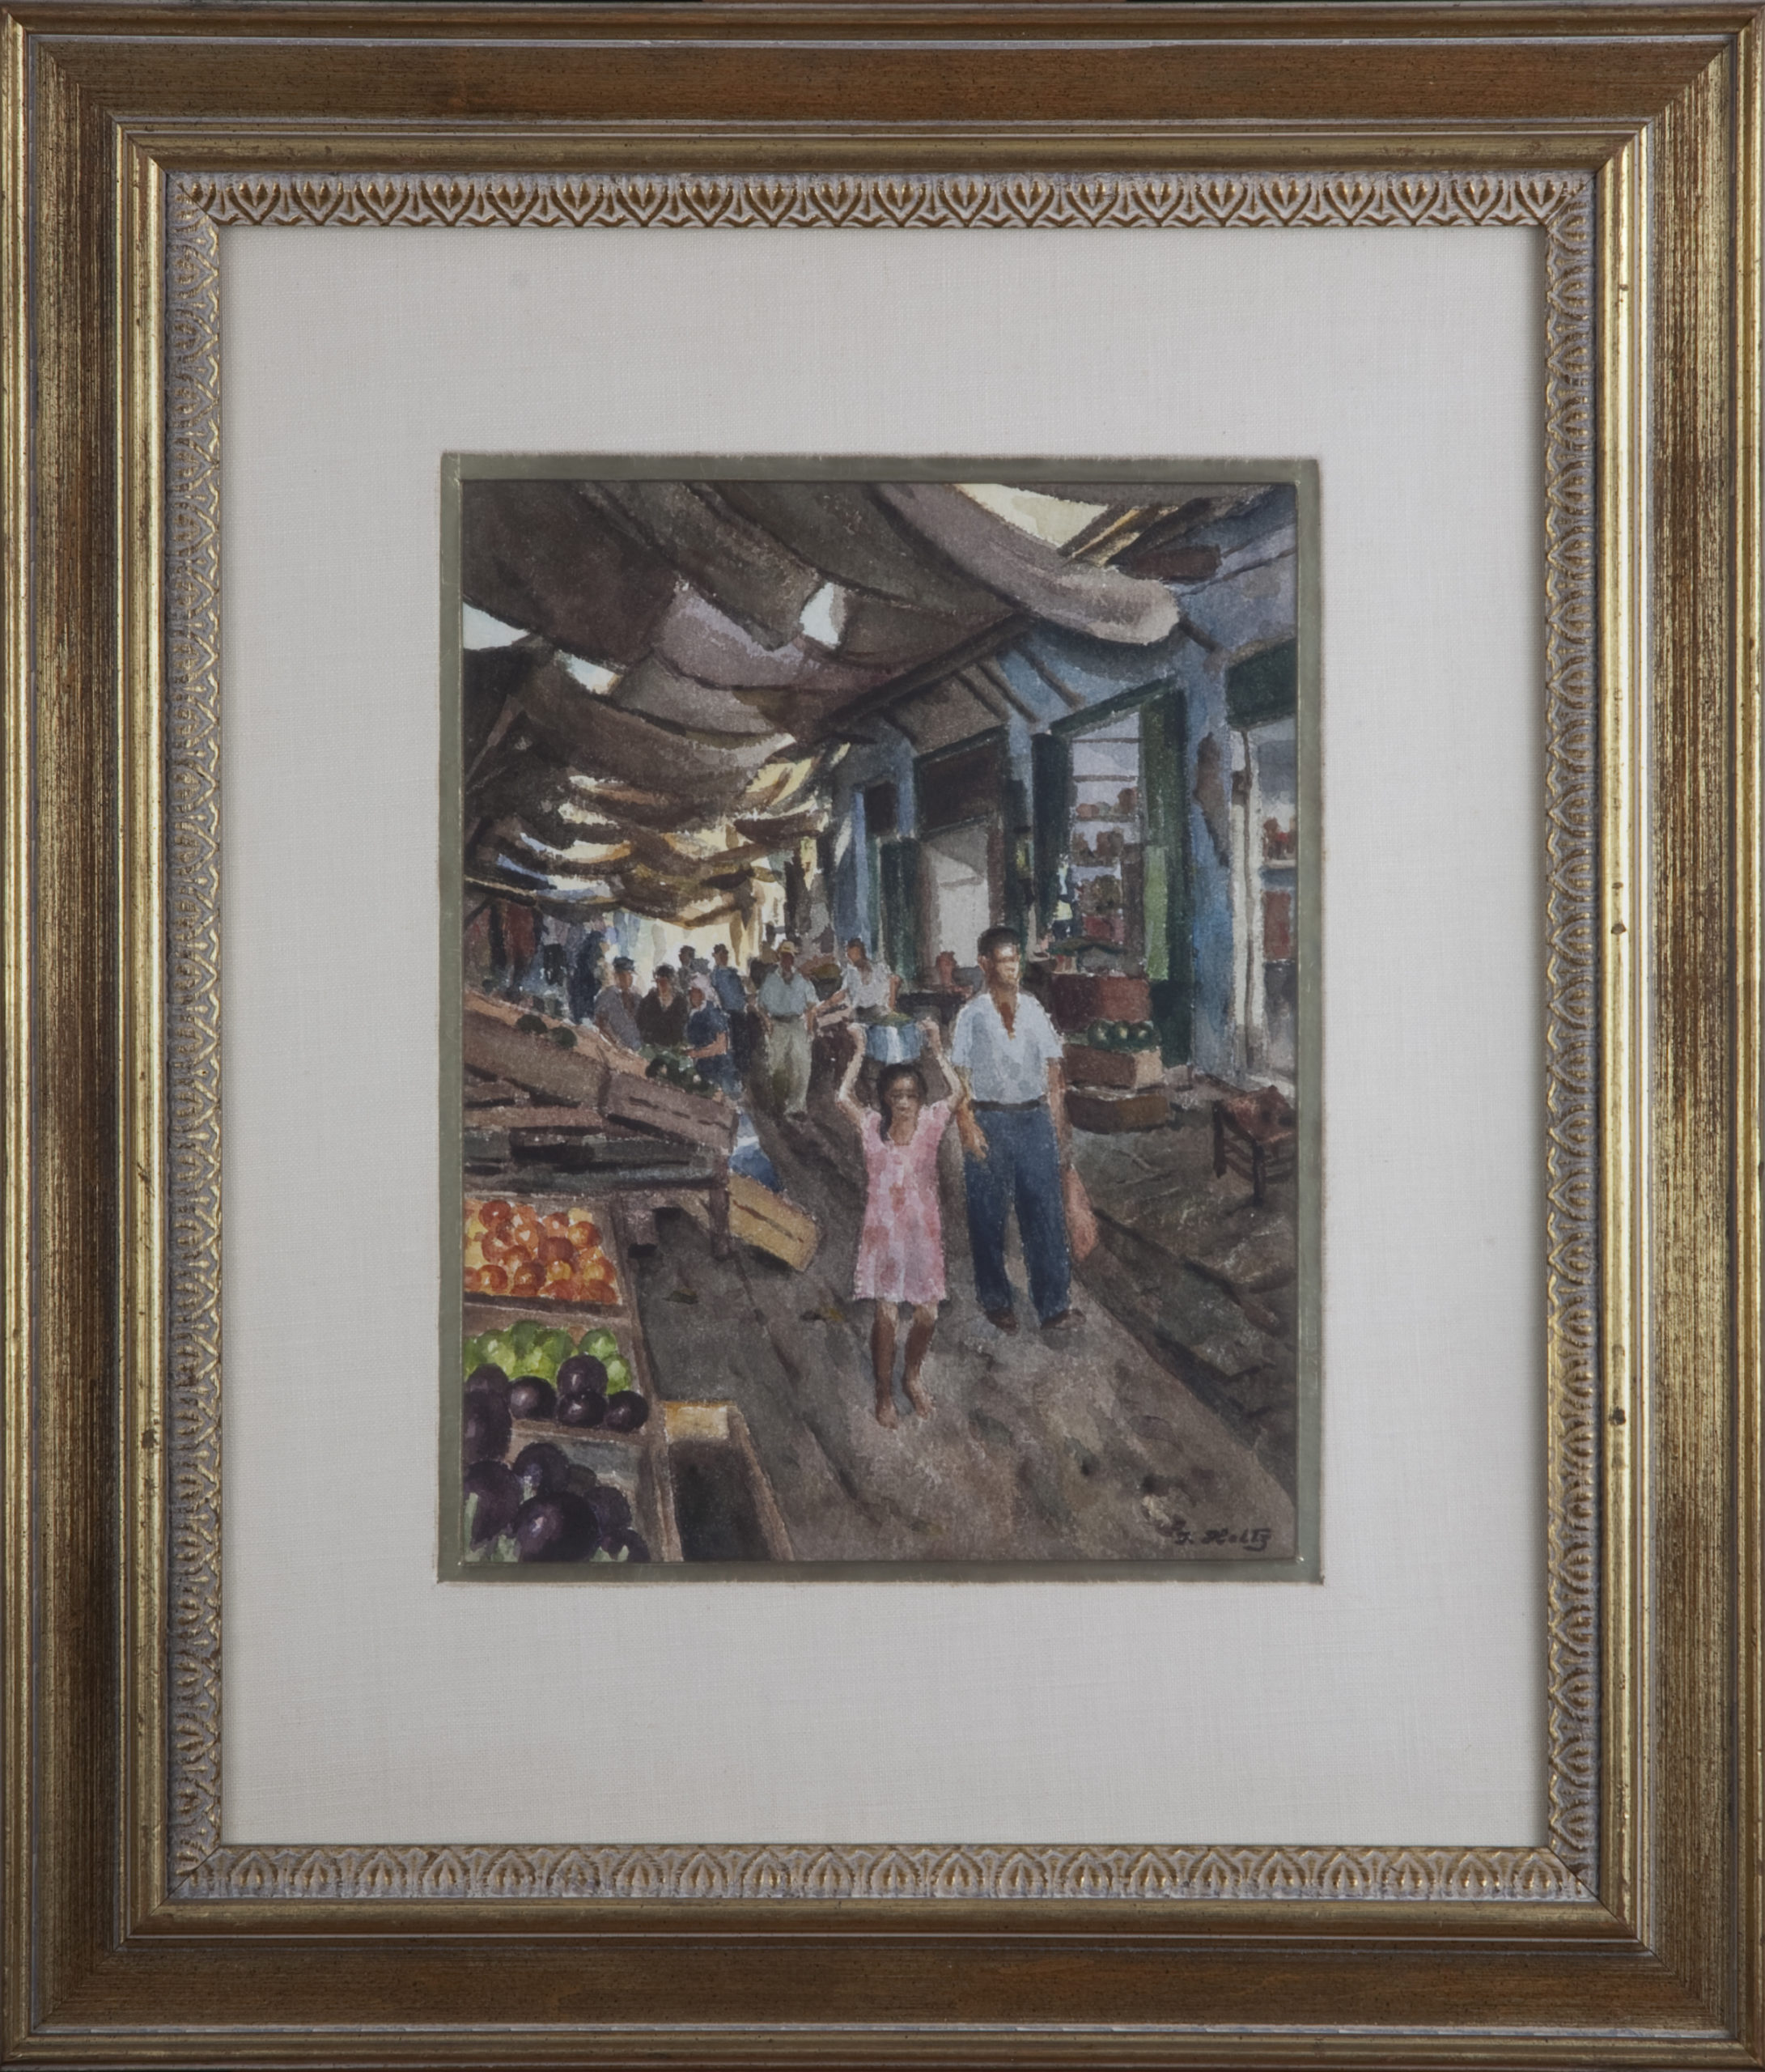 235 Marketplace Acco 1960 - Watercolor - 9 x 11.25 - Frame: 18.5 x 22 x 1